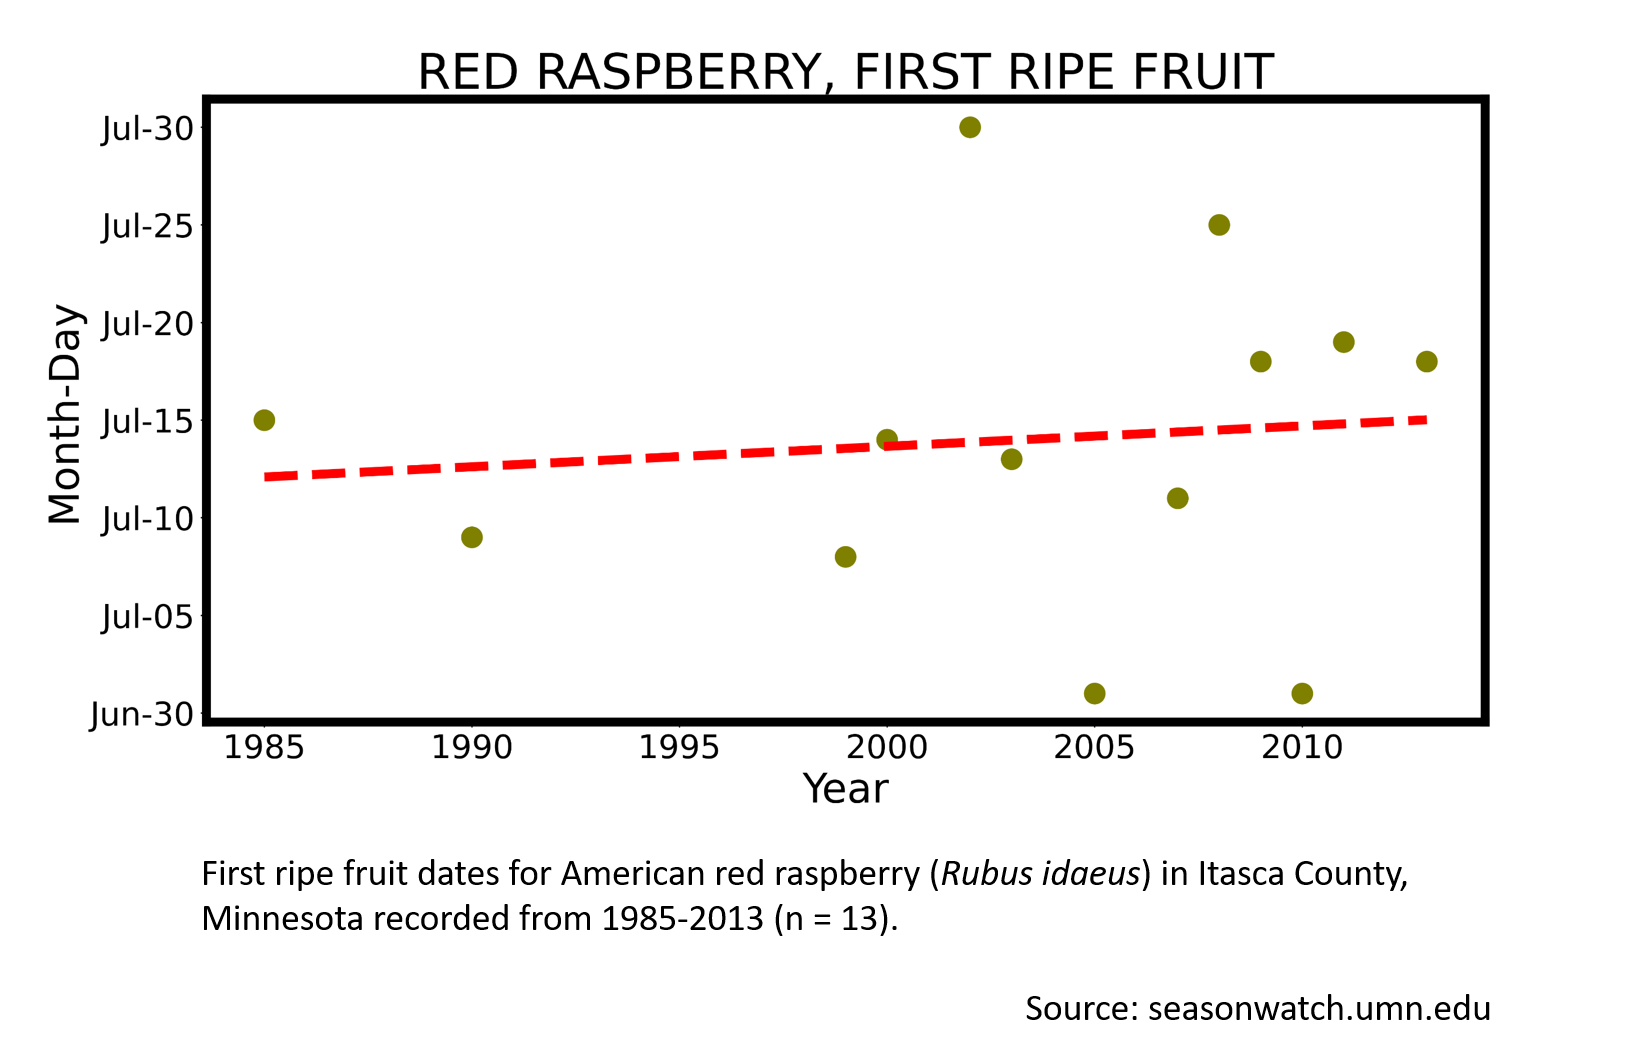 Scatterplot showing American red raspberry phenology observations in Itasca County, Minnesota